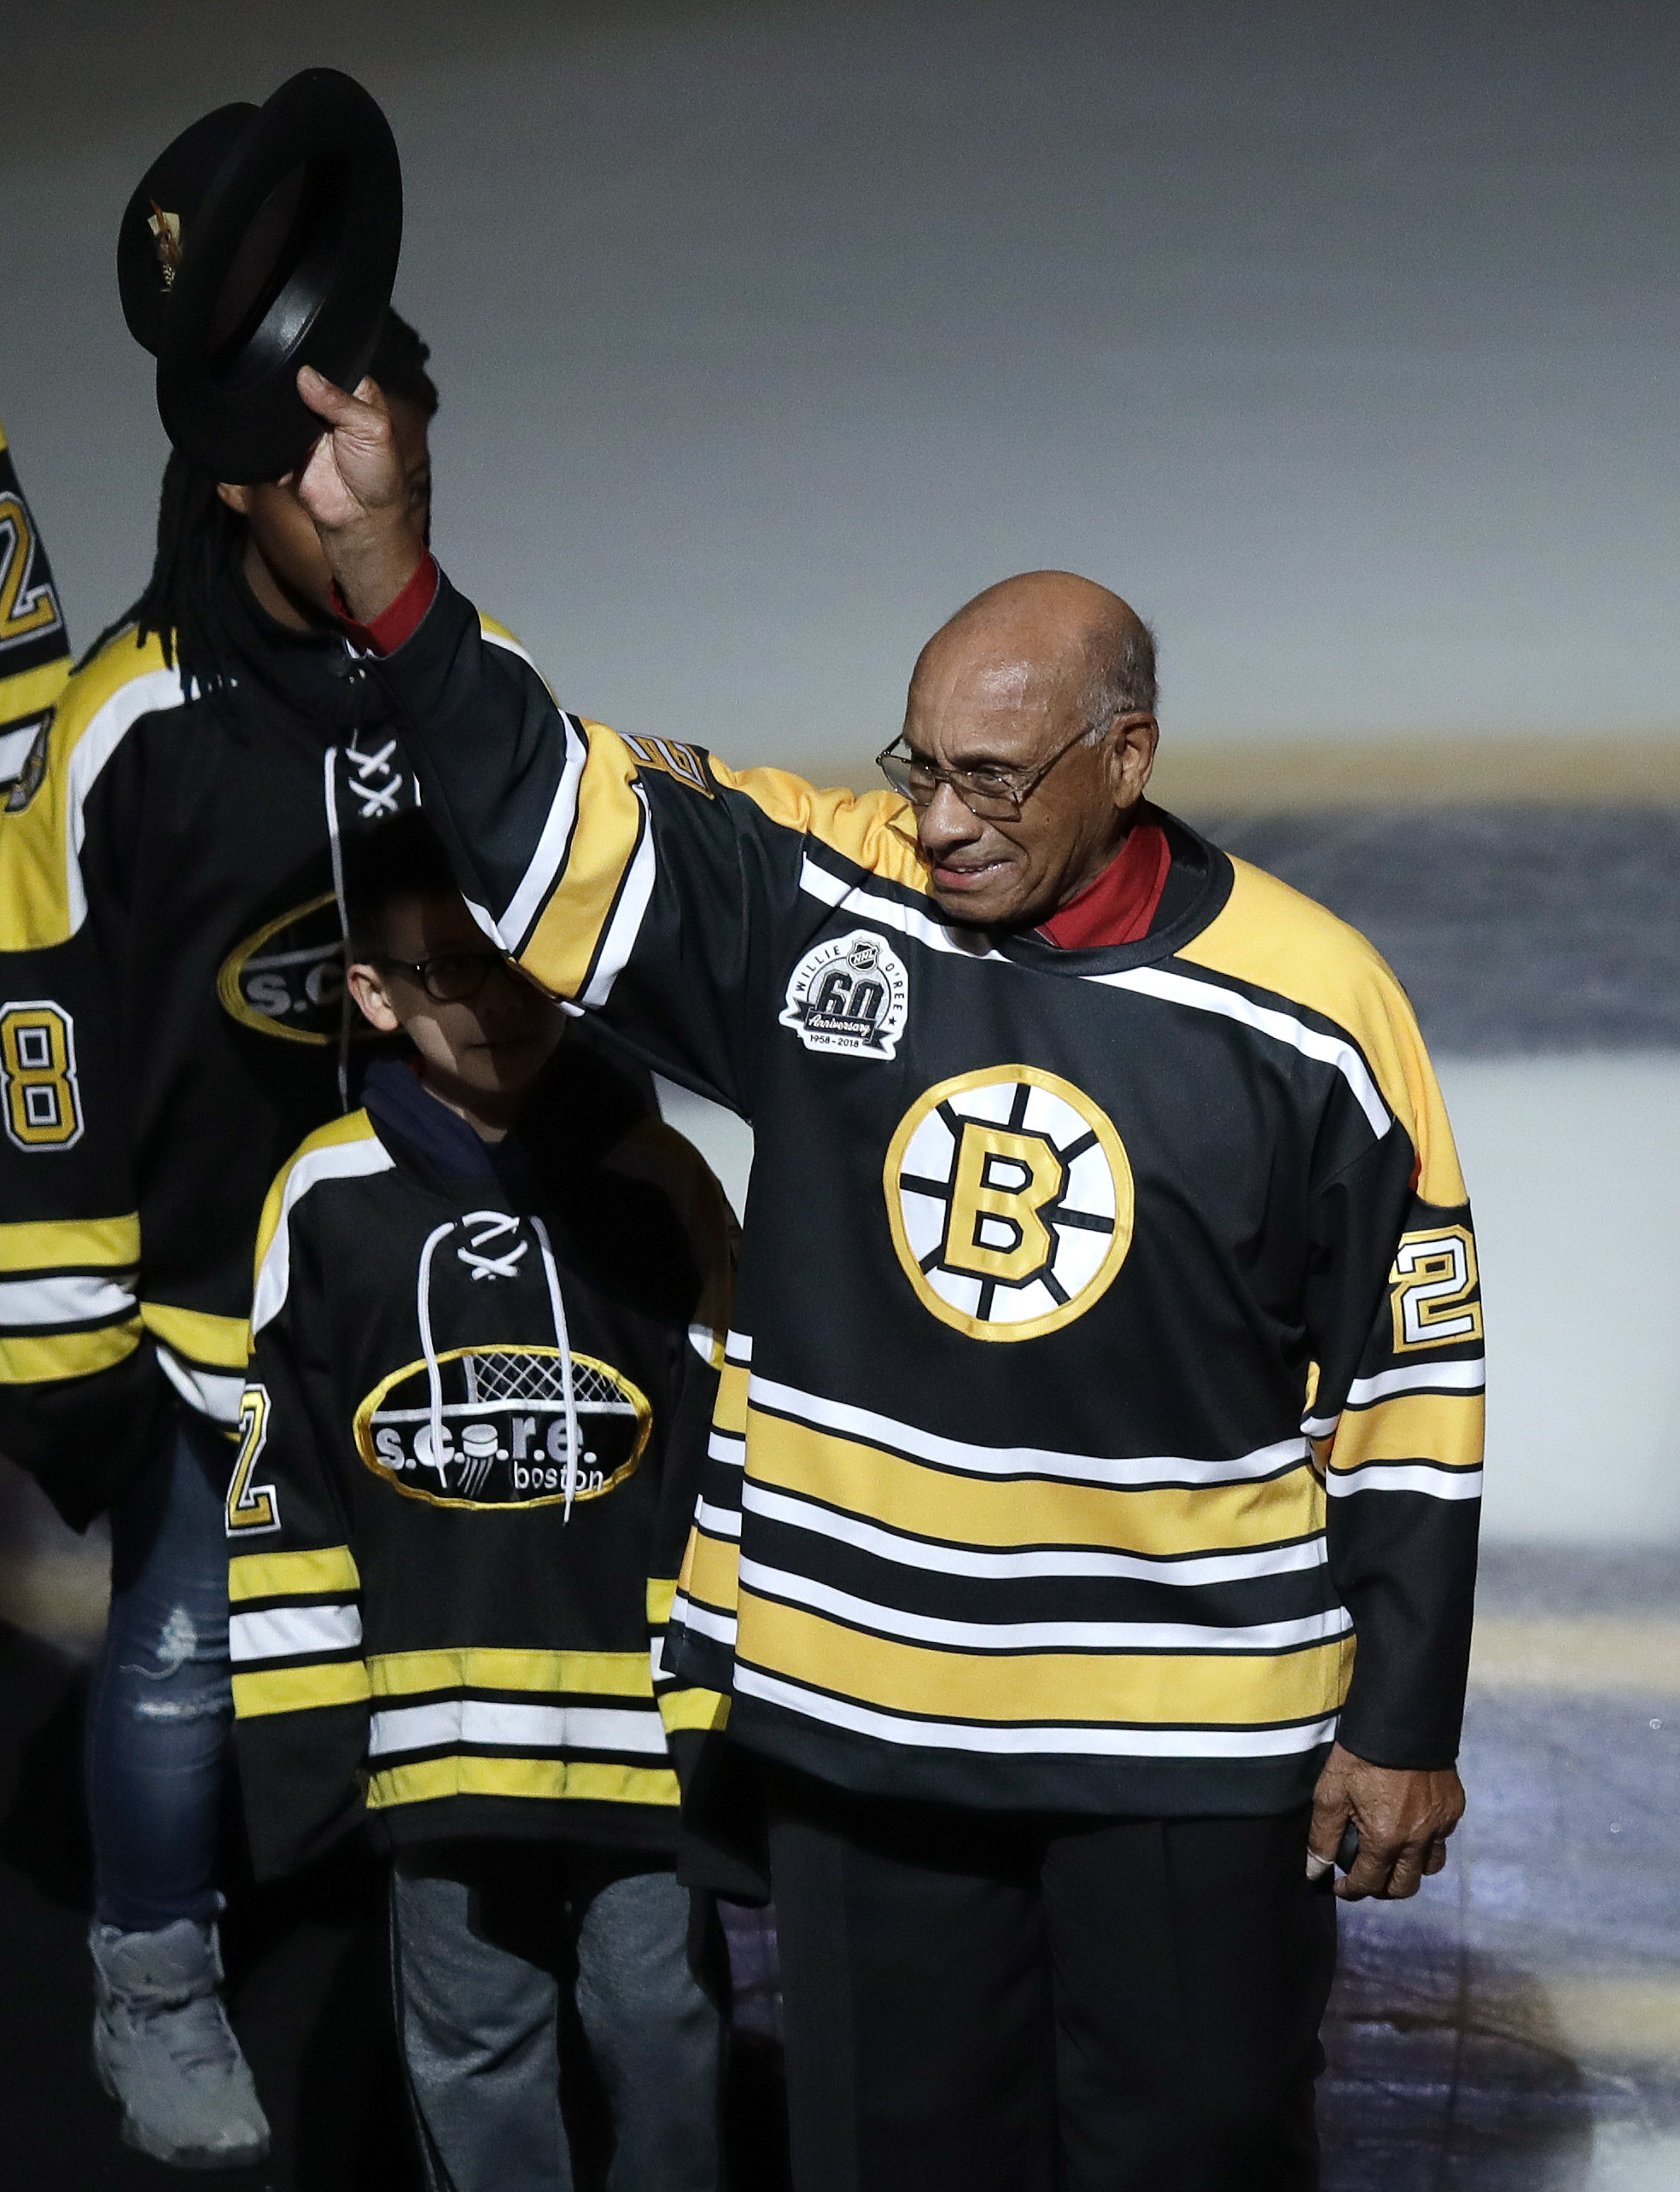 Q&A: Willie O'Ree on NHL career, post-playing days, push for inclusion